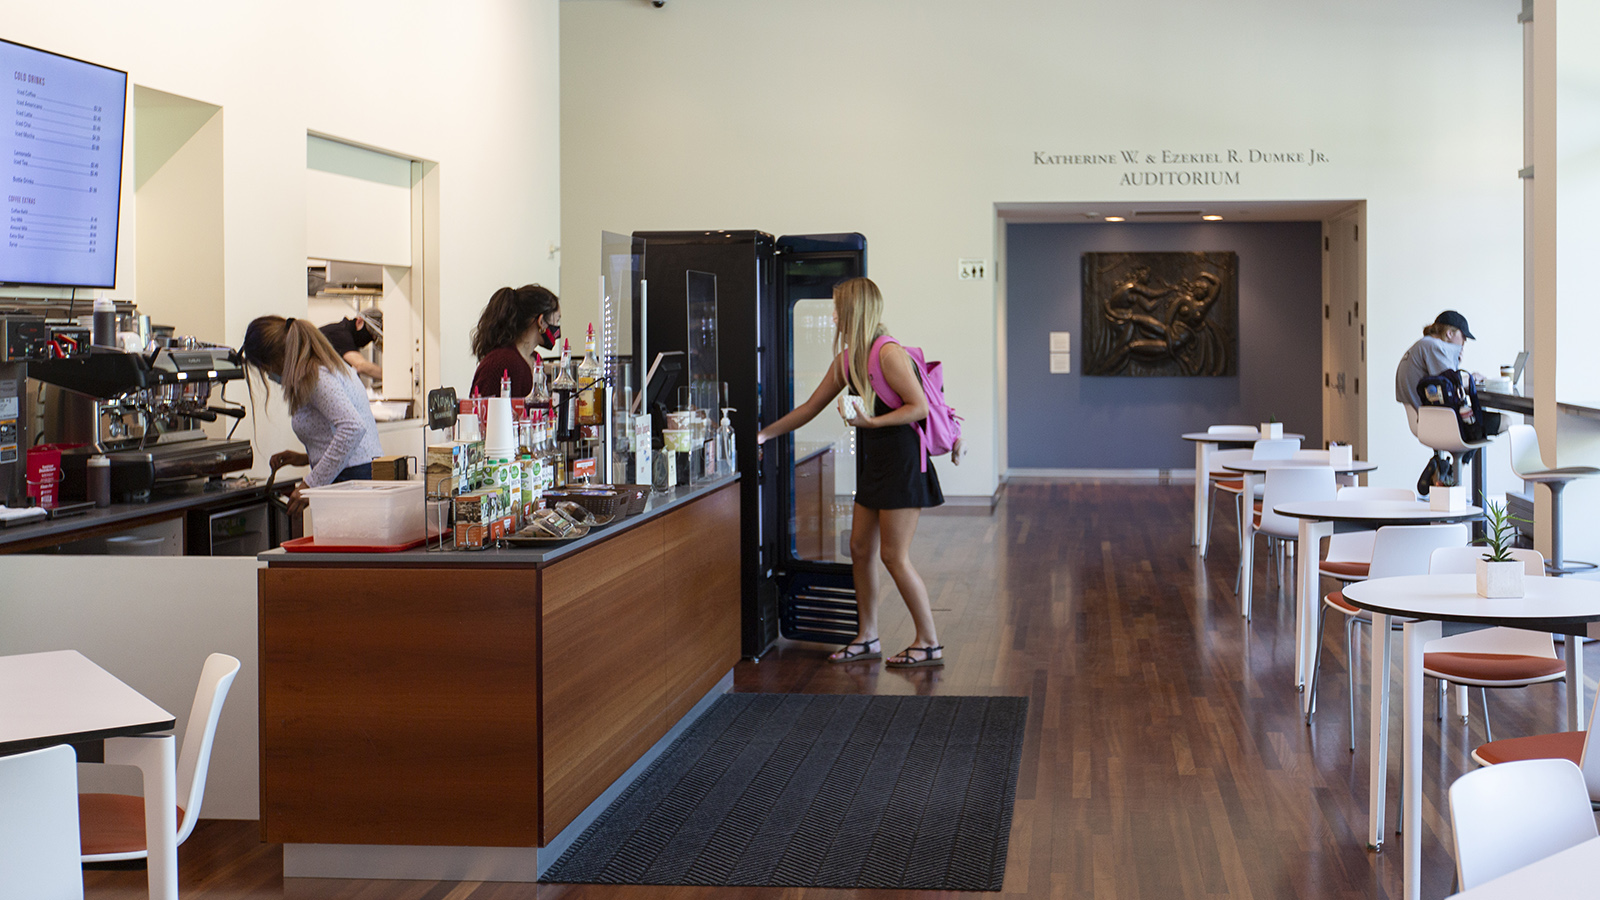 view of the museum cafe with a customer at the counter reching to hand payment to the barista behind the counter. There is another customer sitting at the long bar in the wondow.